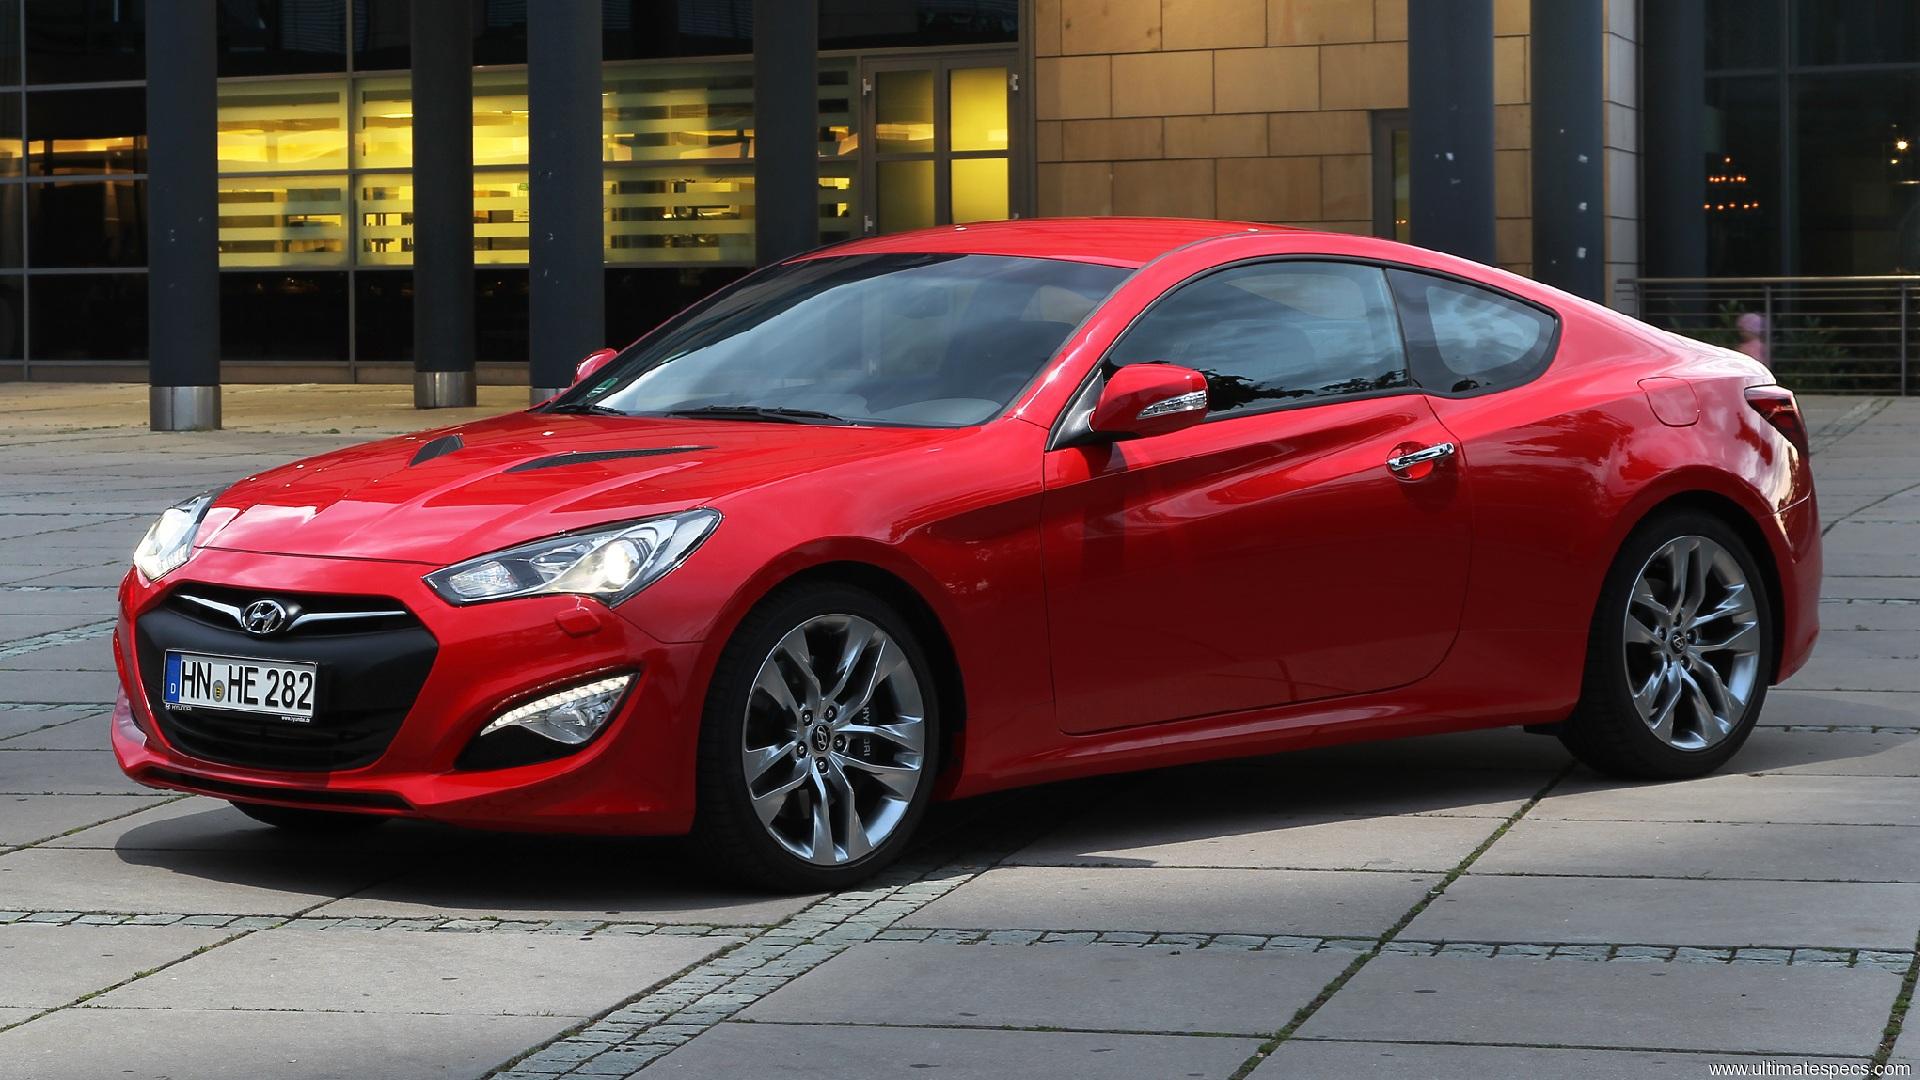 Hyundai Genesis Coupe Images, pictures, gallery